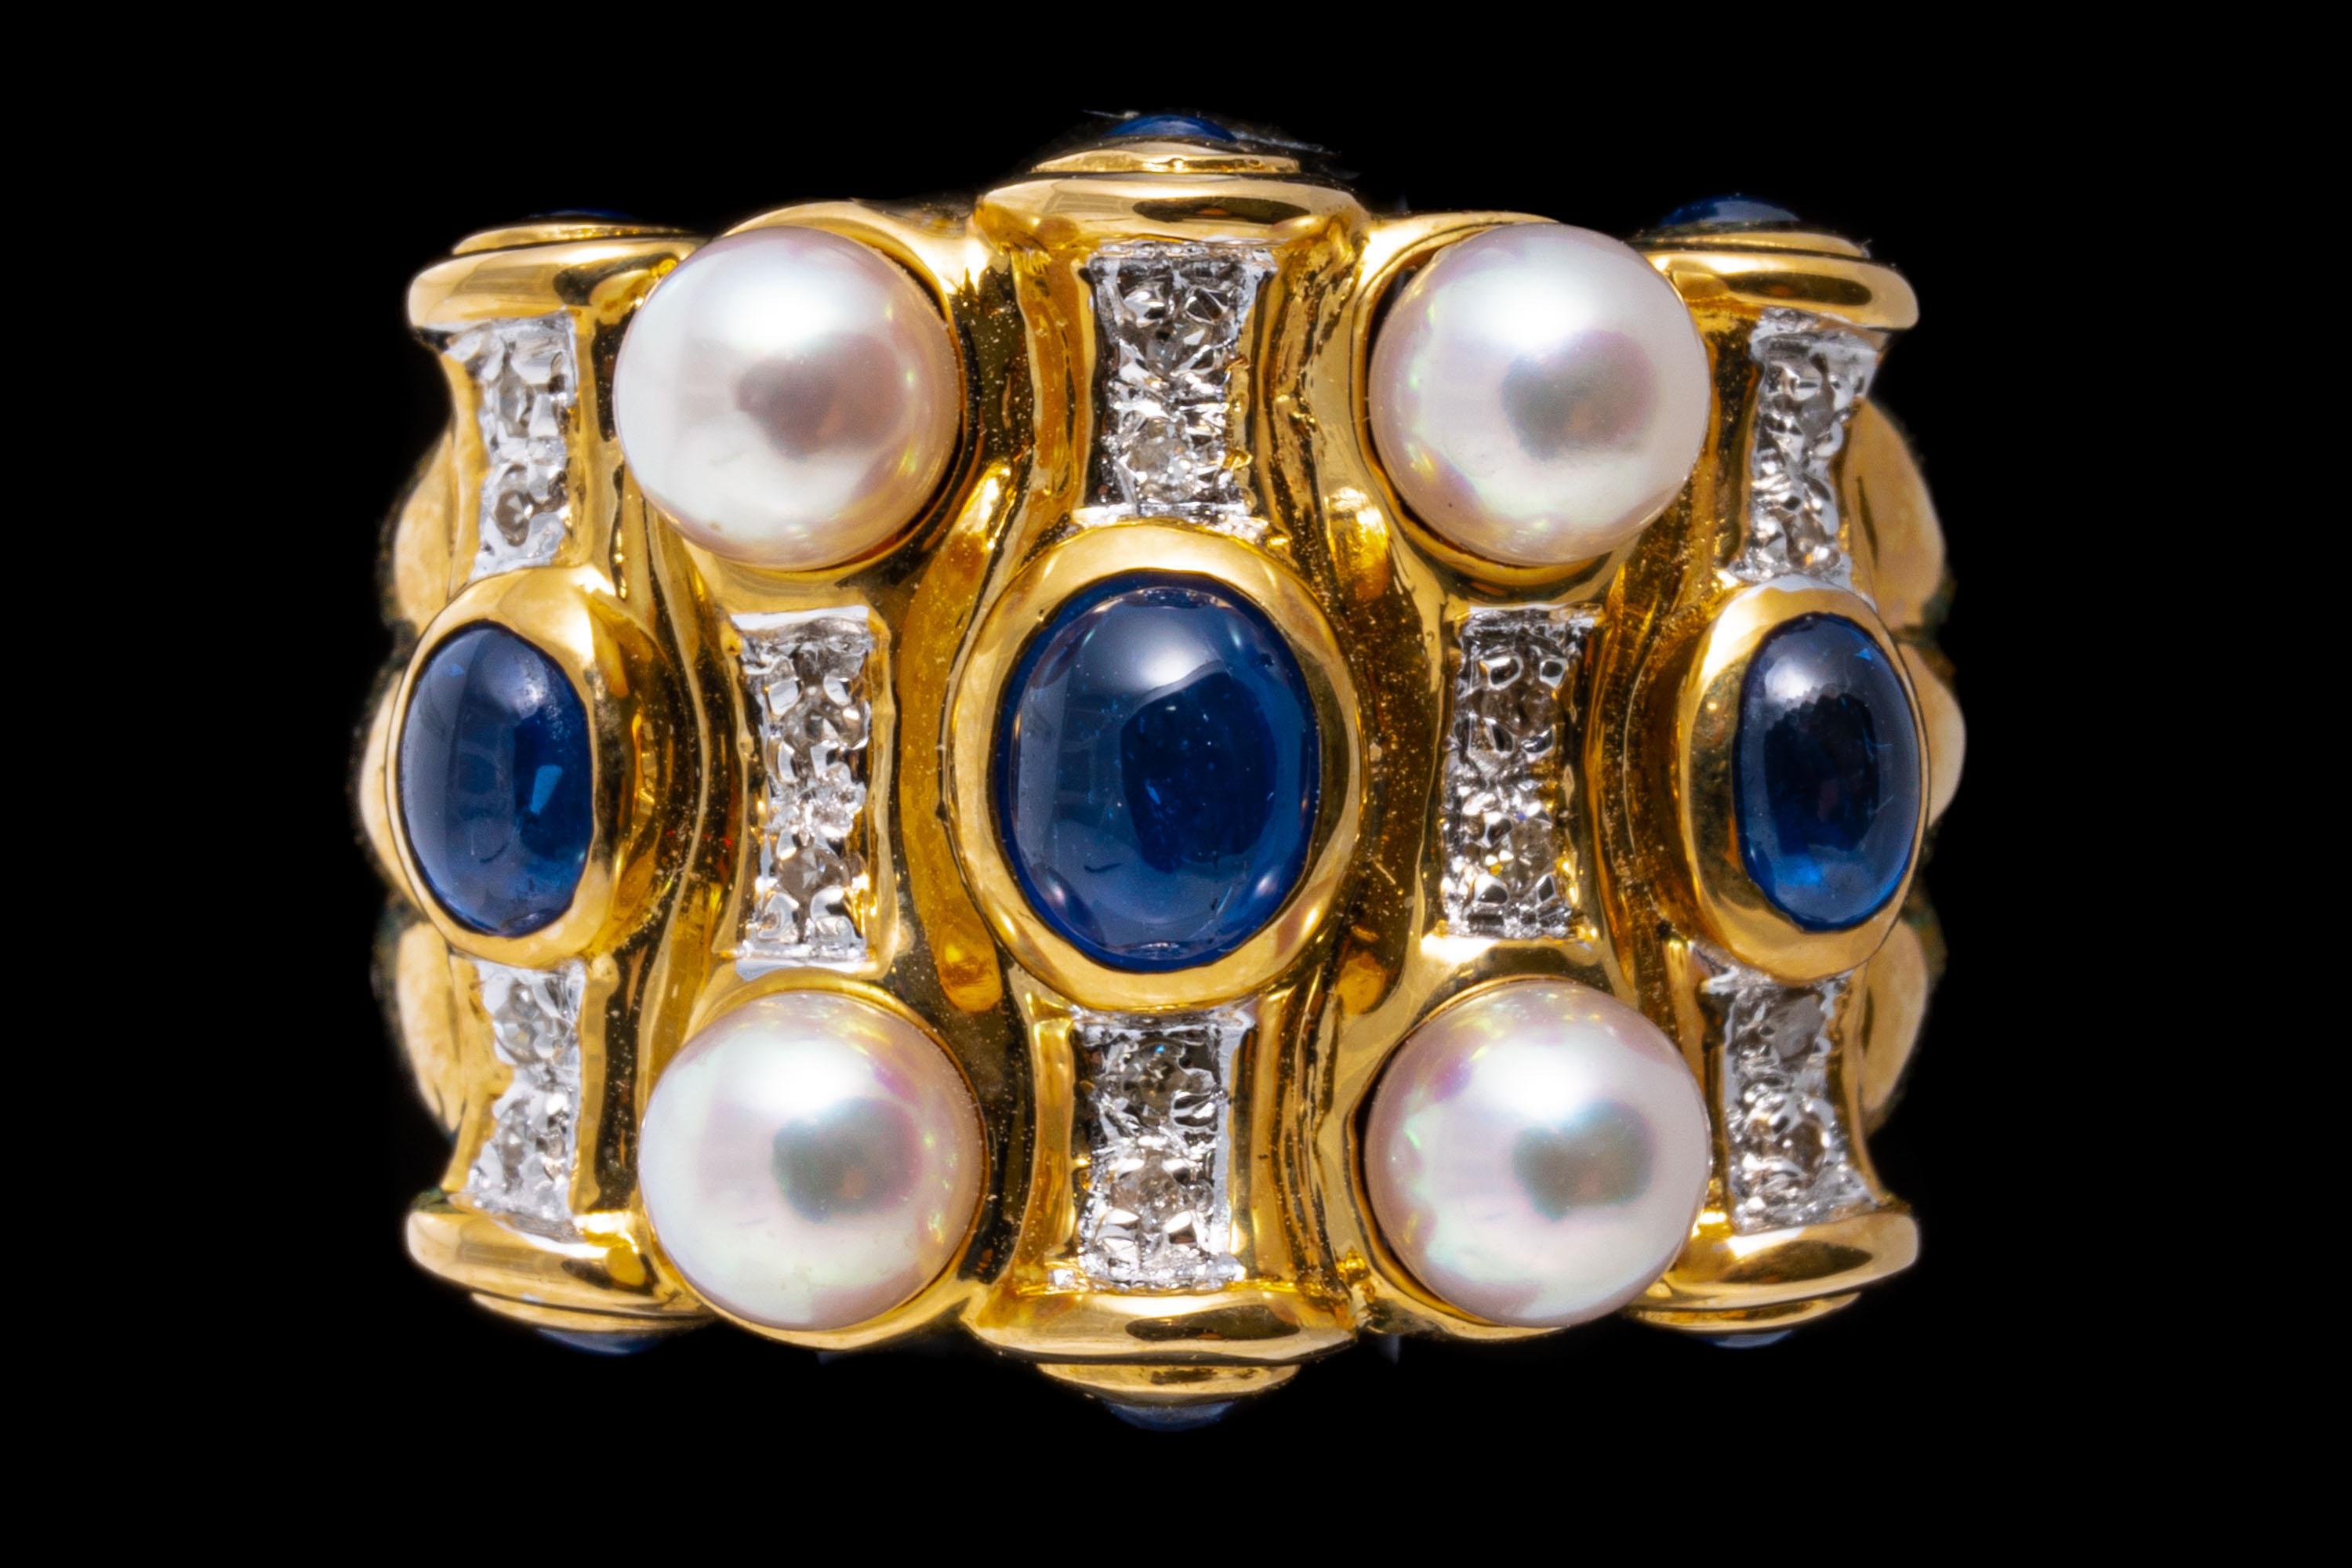 14k Yellow Gold Wide Cabachon Sapphire, Diamond And Cultured Pearl Dome Ring For Sale 4